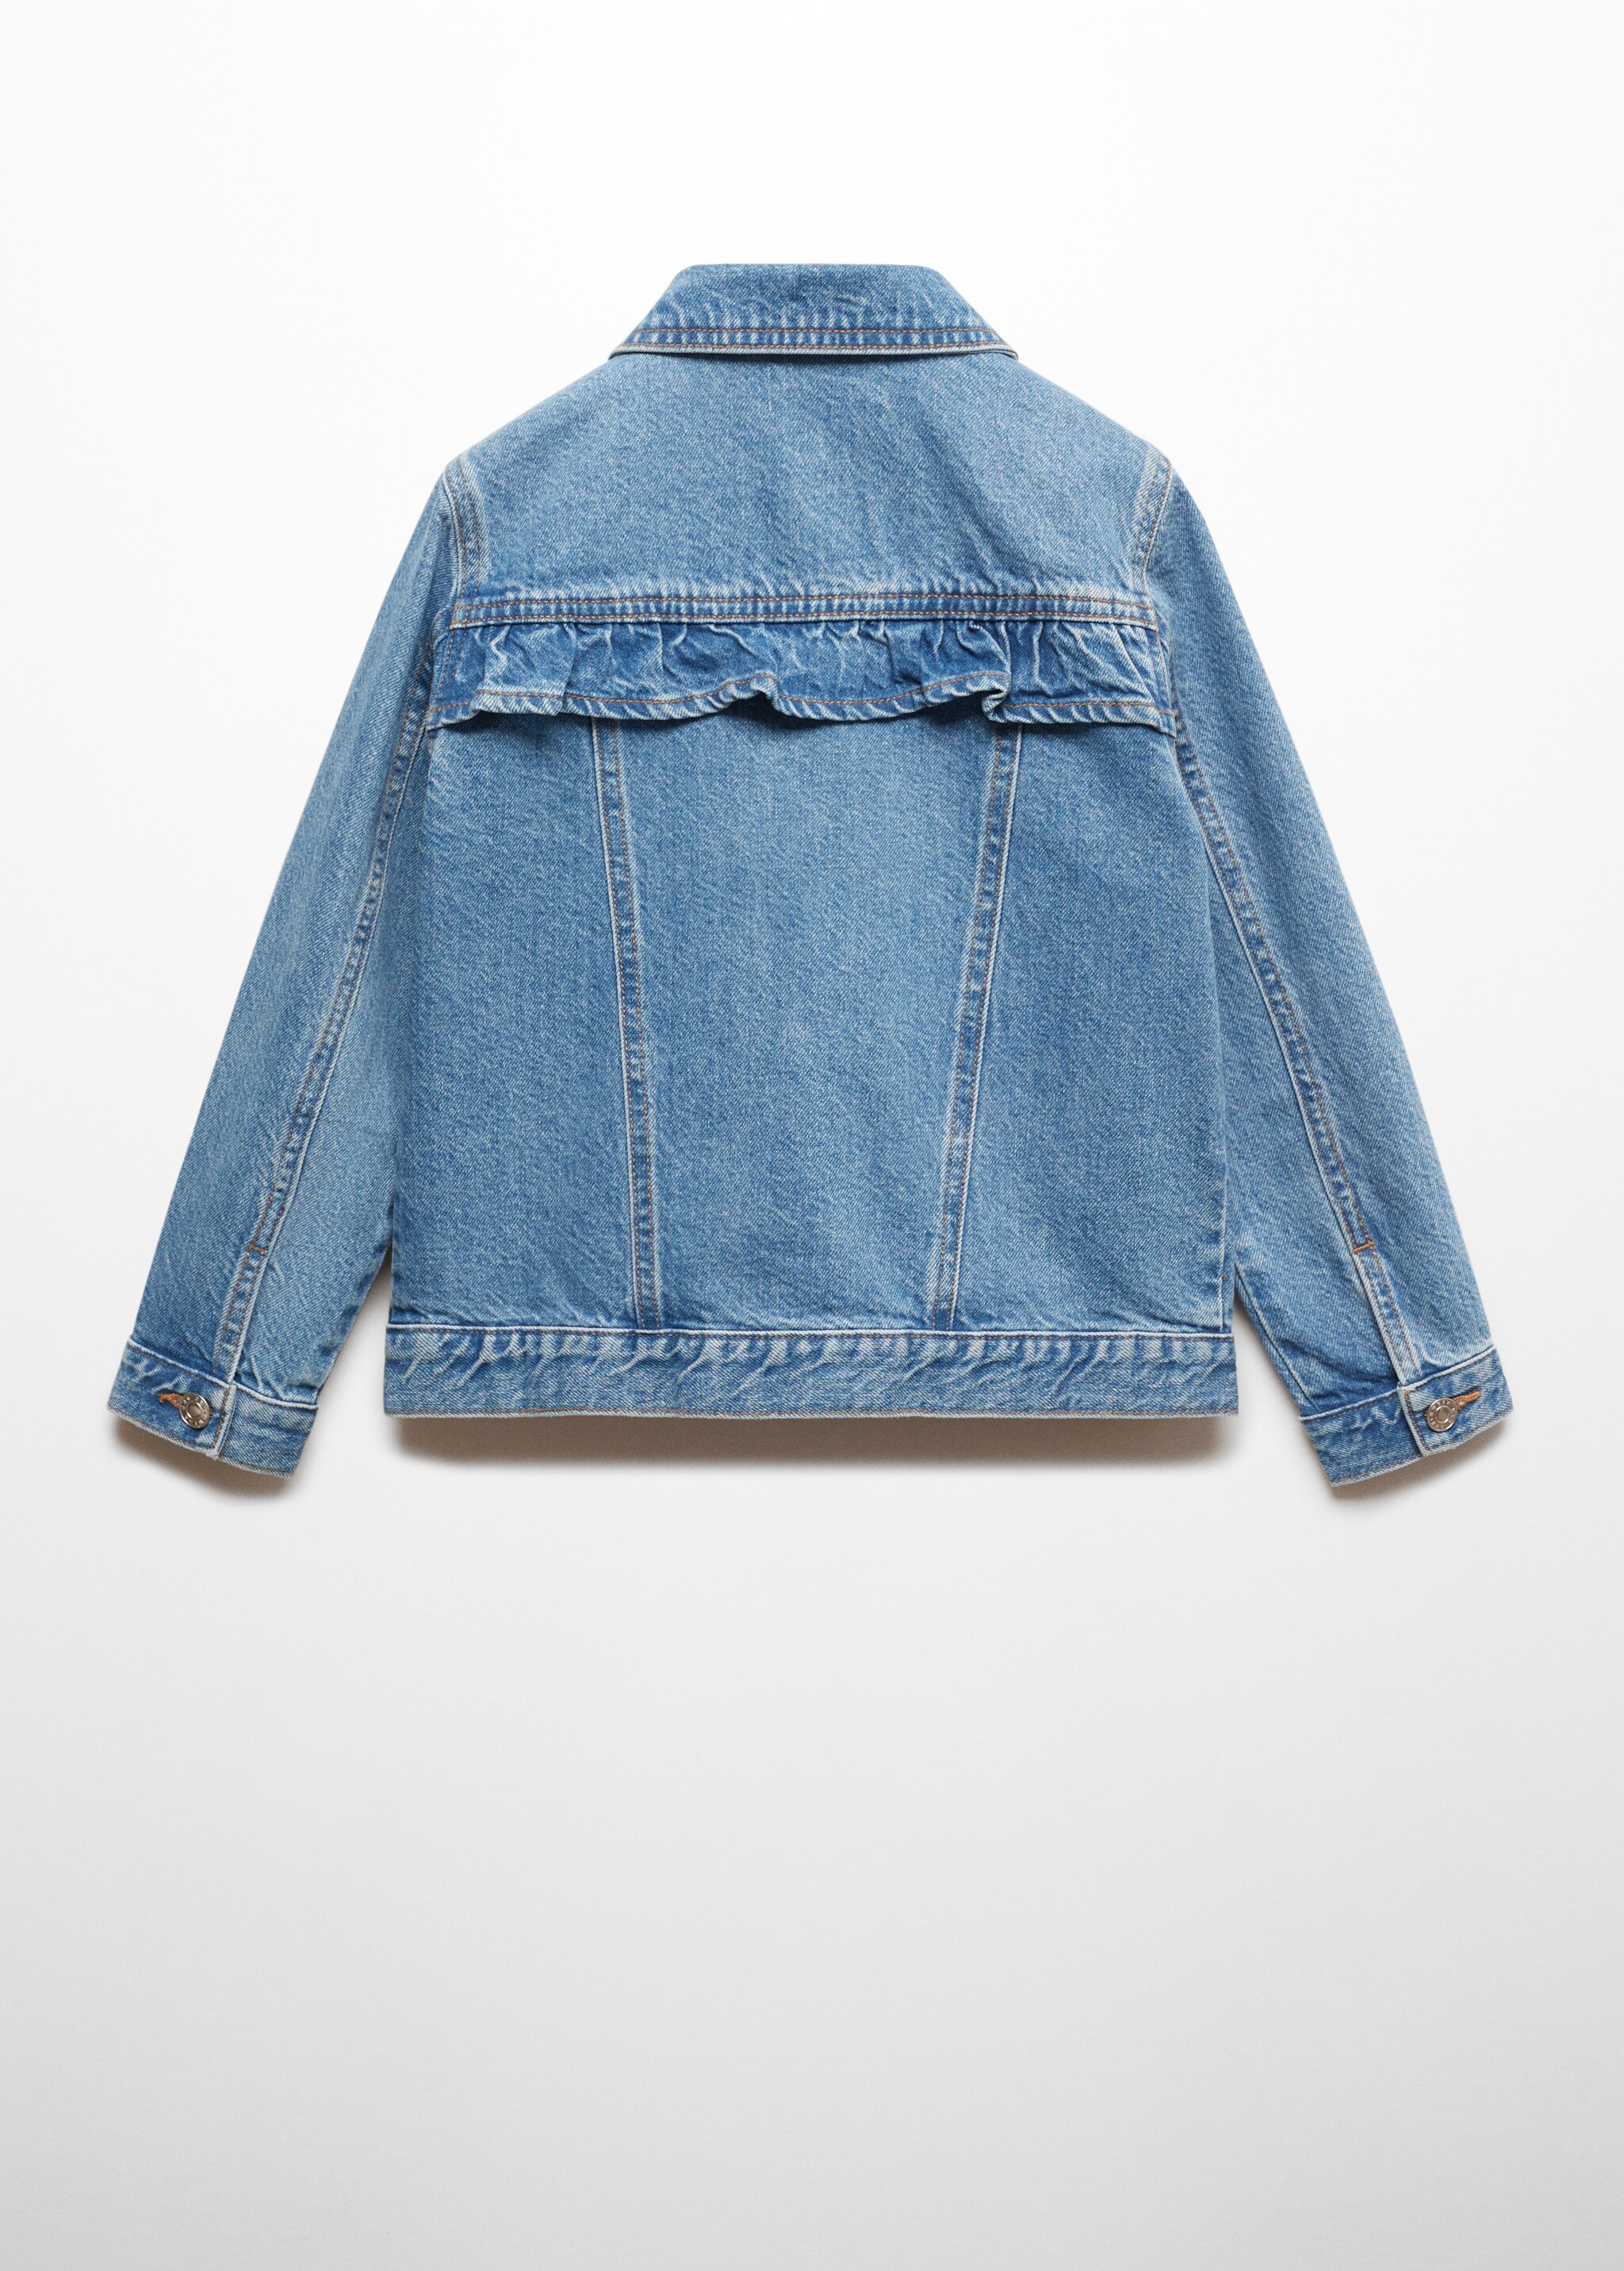 Denim jacket - Reverse of the article